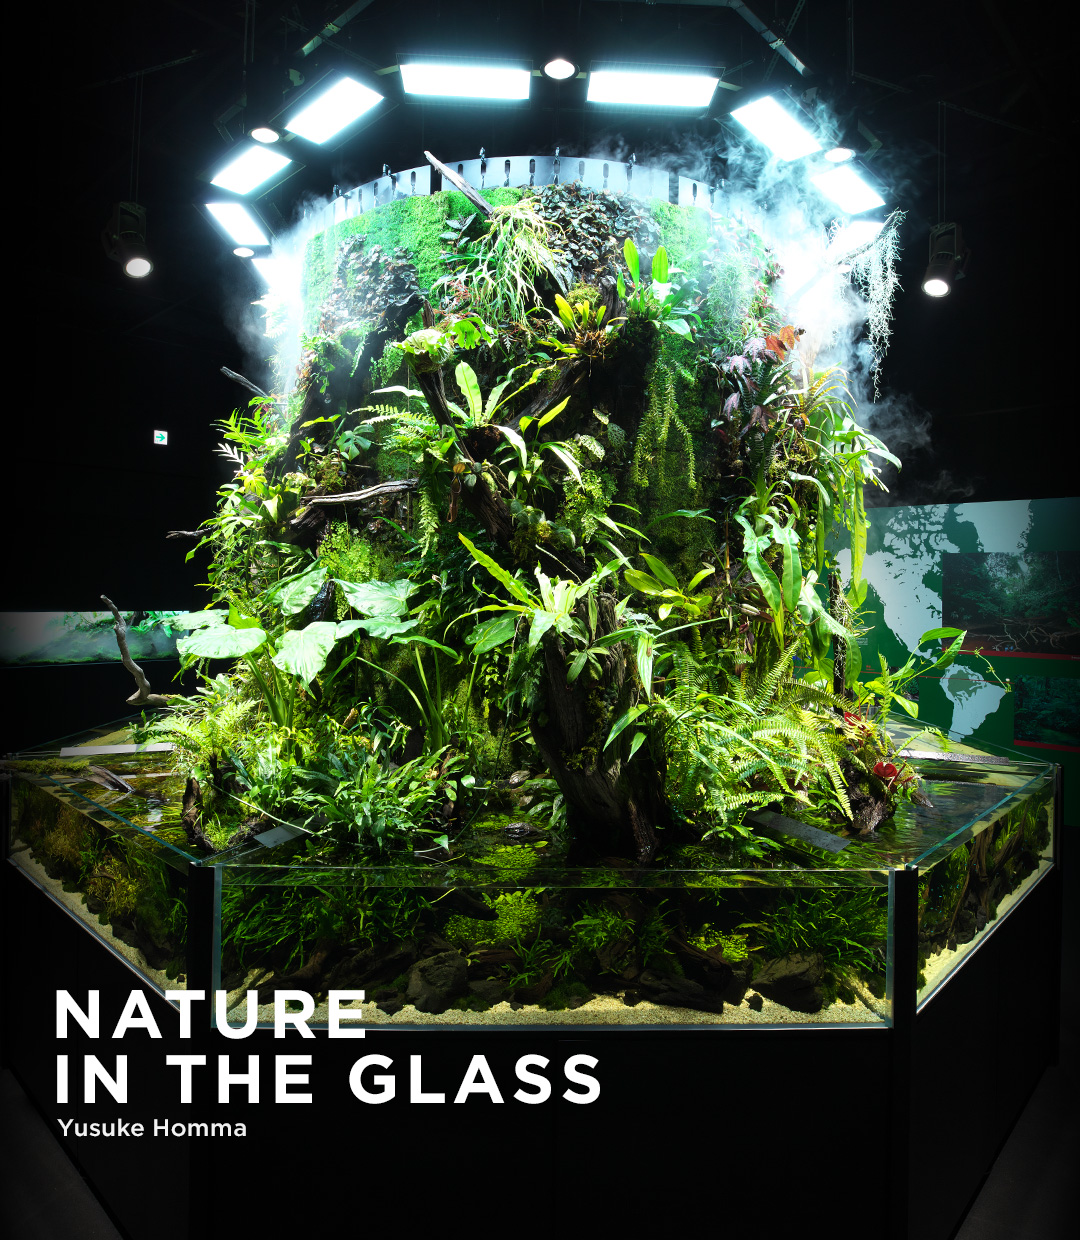 NATURE IN THE GLASS ‘Invitation To Tropical Rainforests’